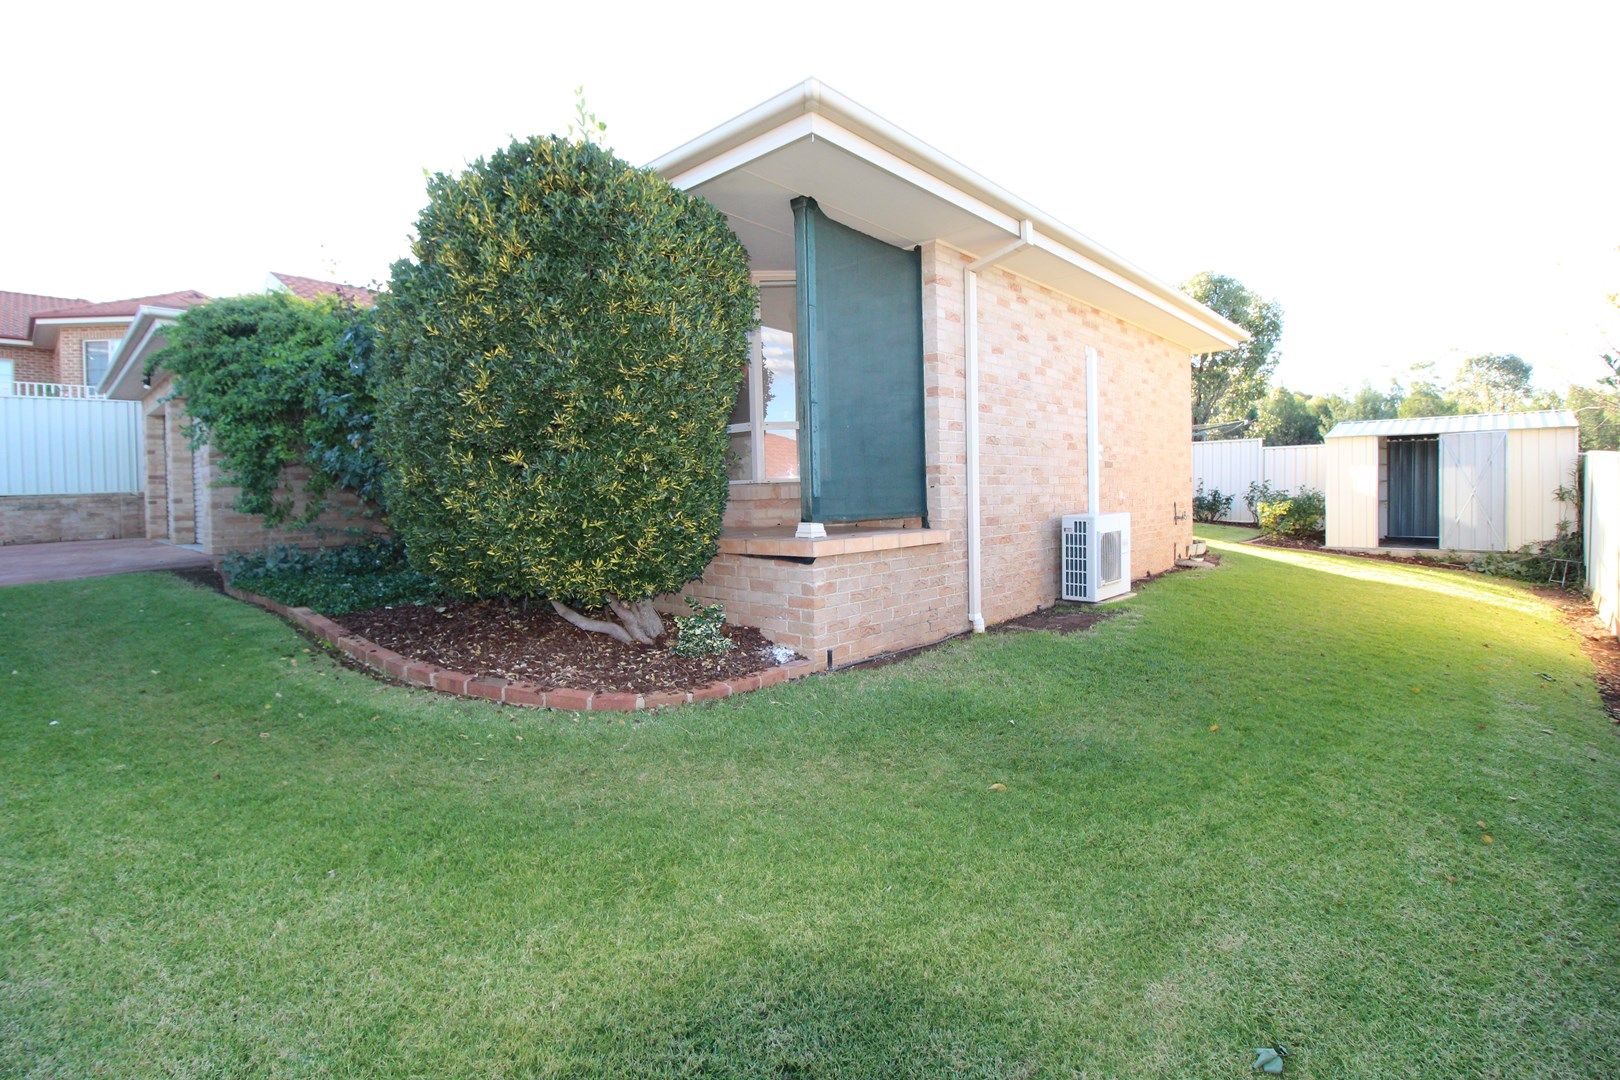 2/42 Waugh Street, Griffith NSW 2680, Image 0